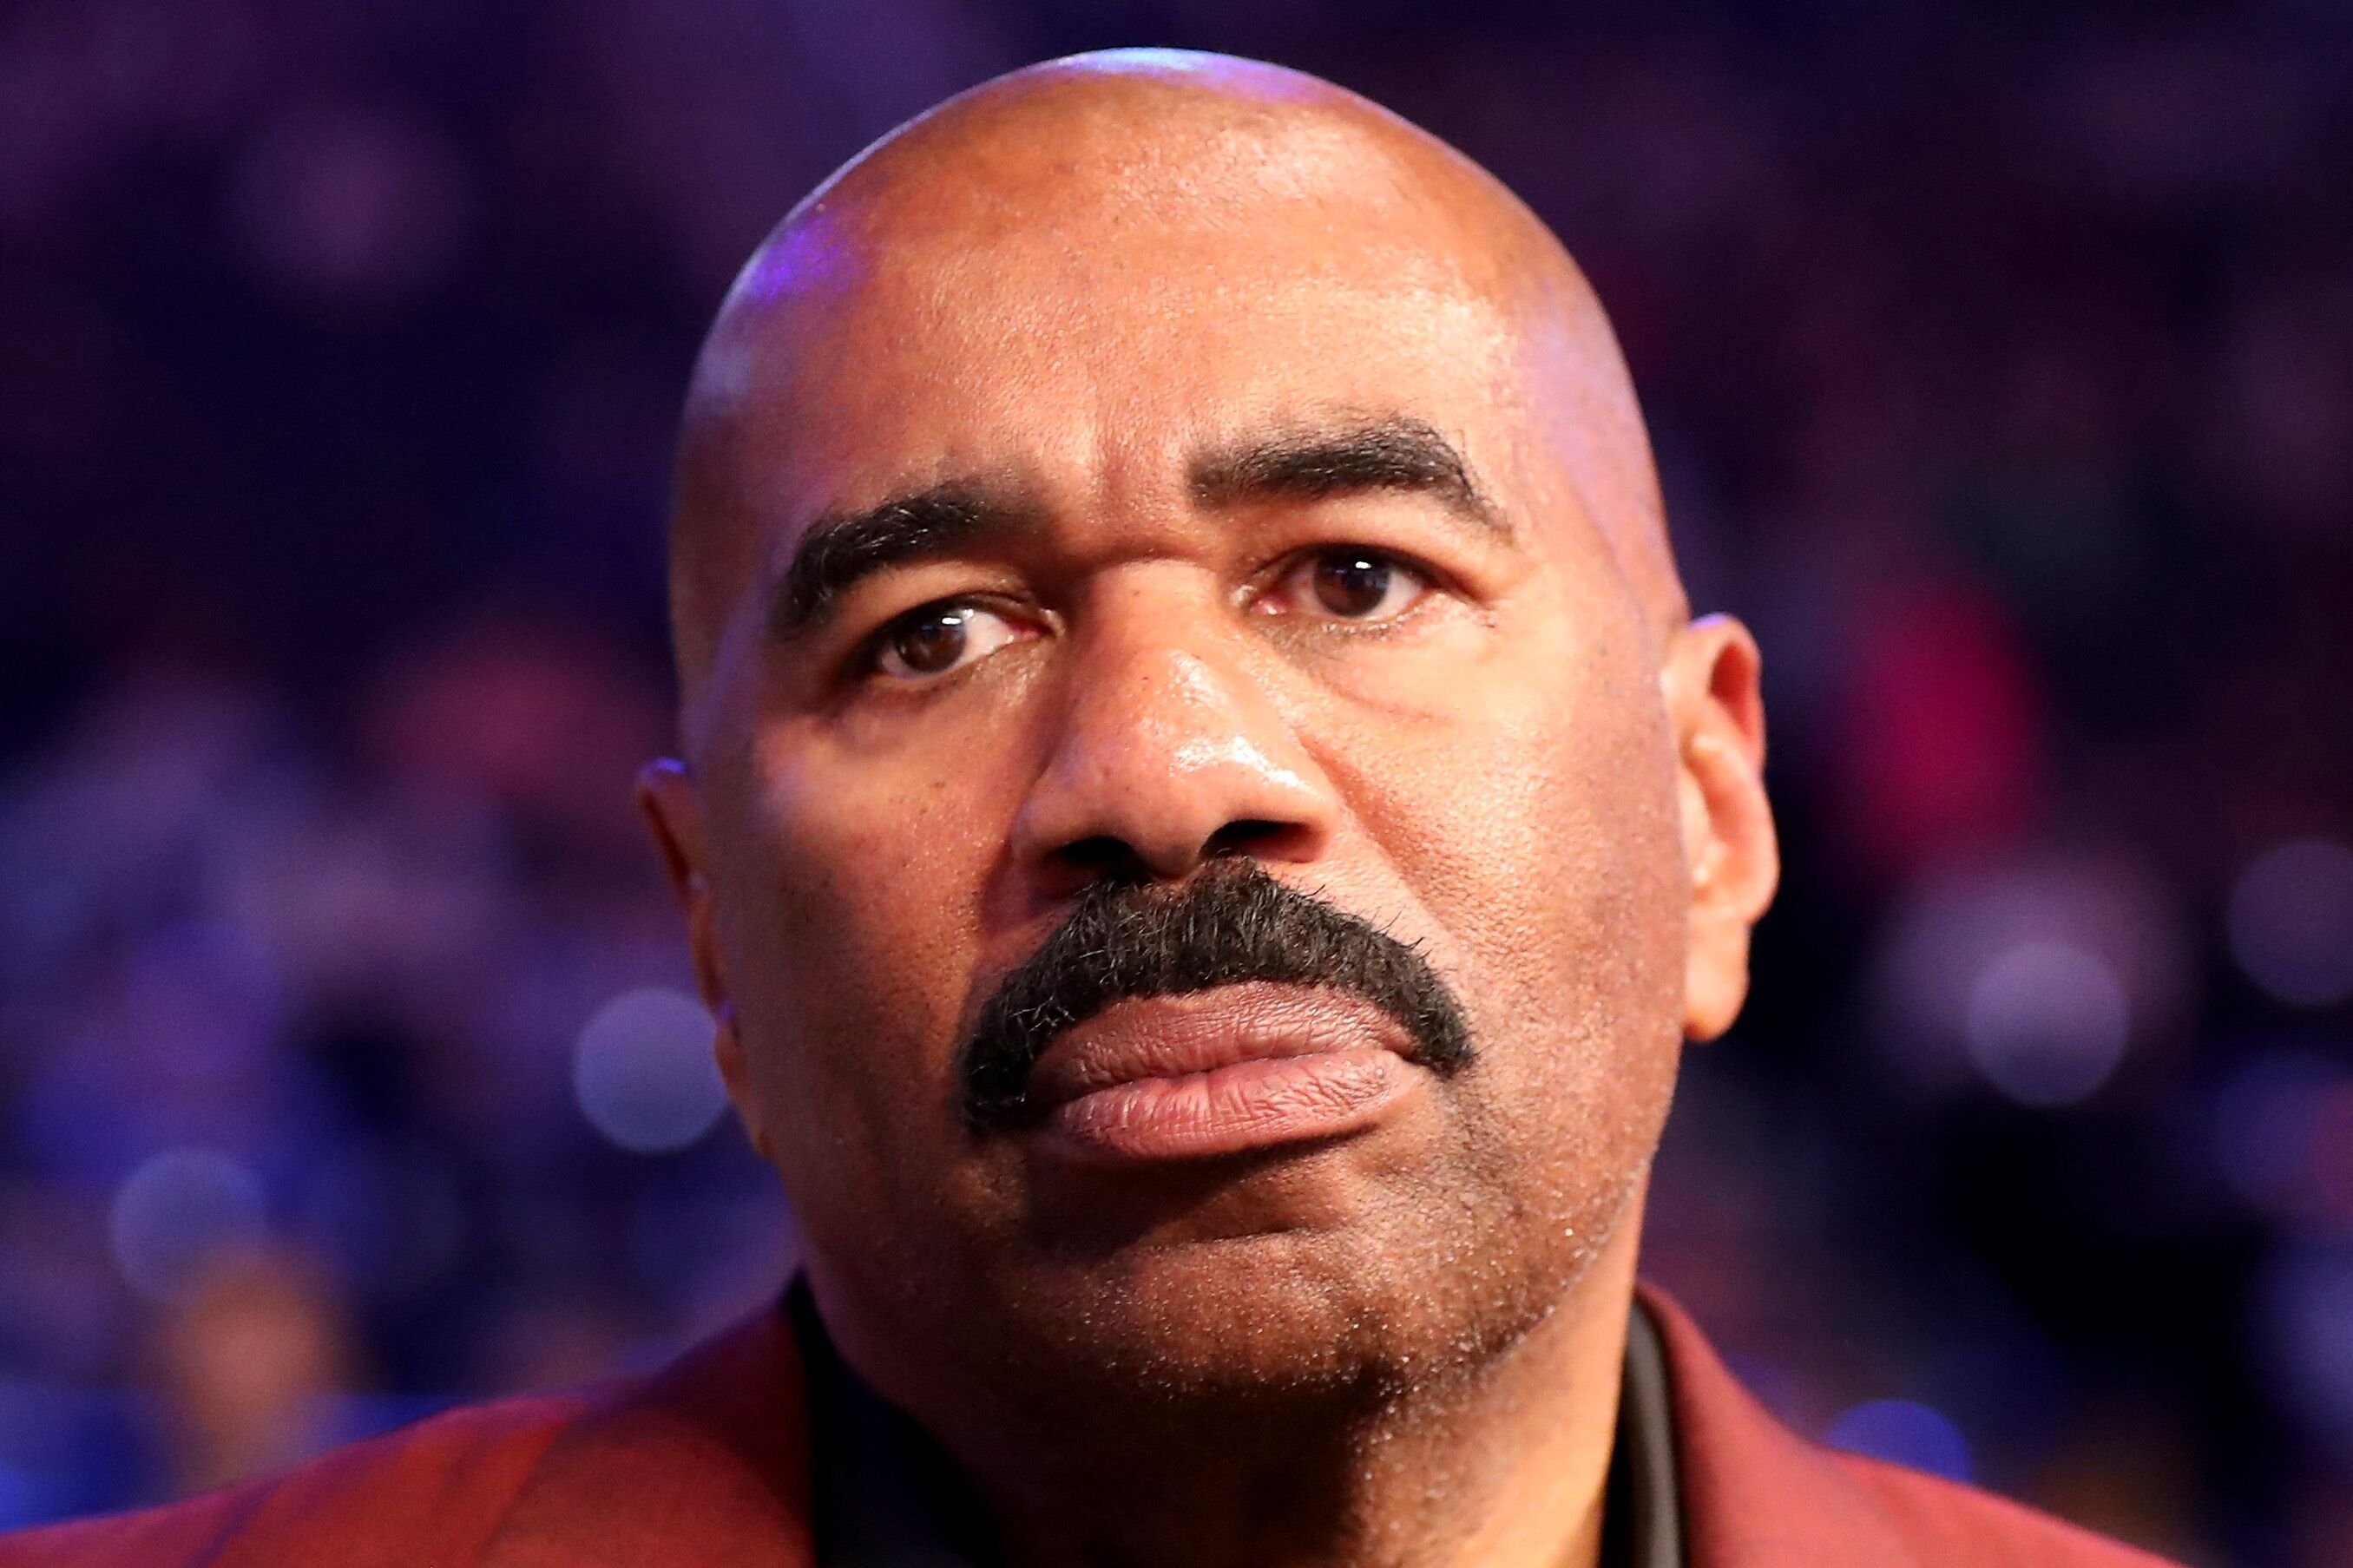 Steve Harvey at the super welterweight boxing match between Floyd Mayweather Jr. and Conor McGregor in Las Vegas in 2017 | Source: Getty Images